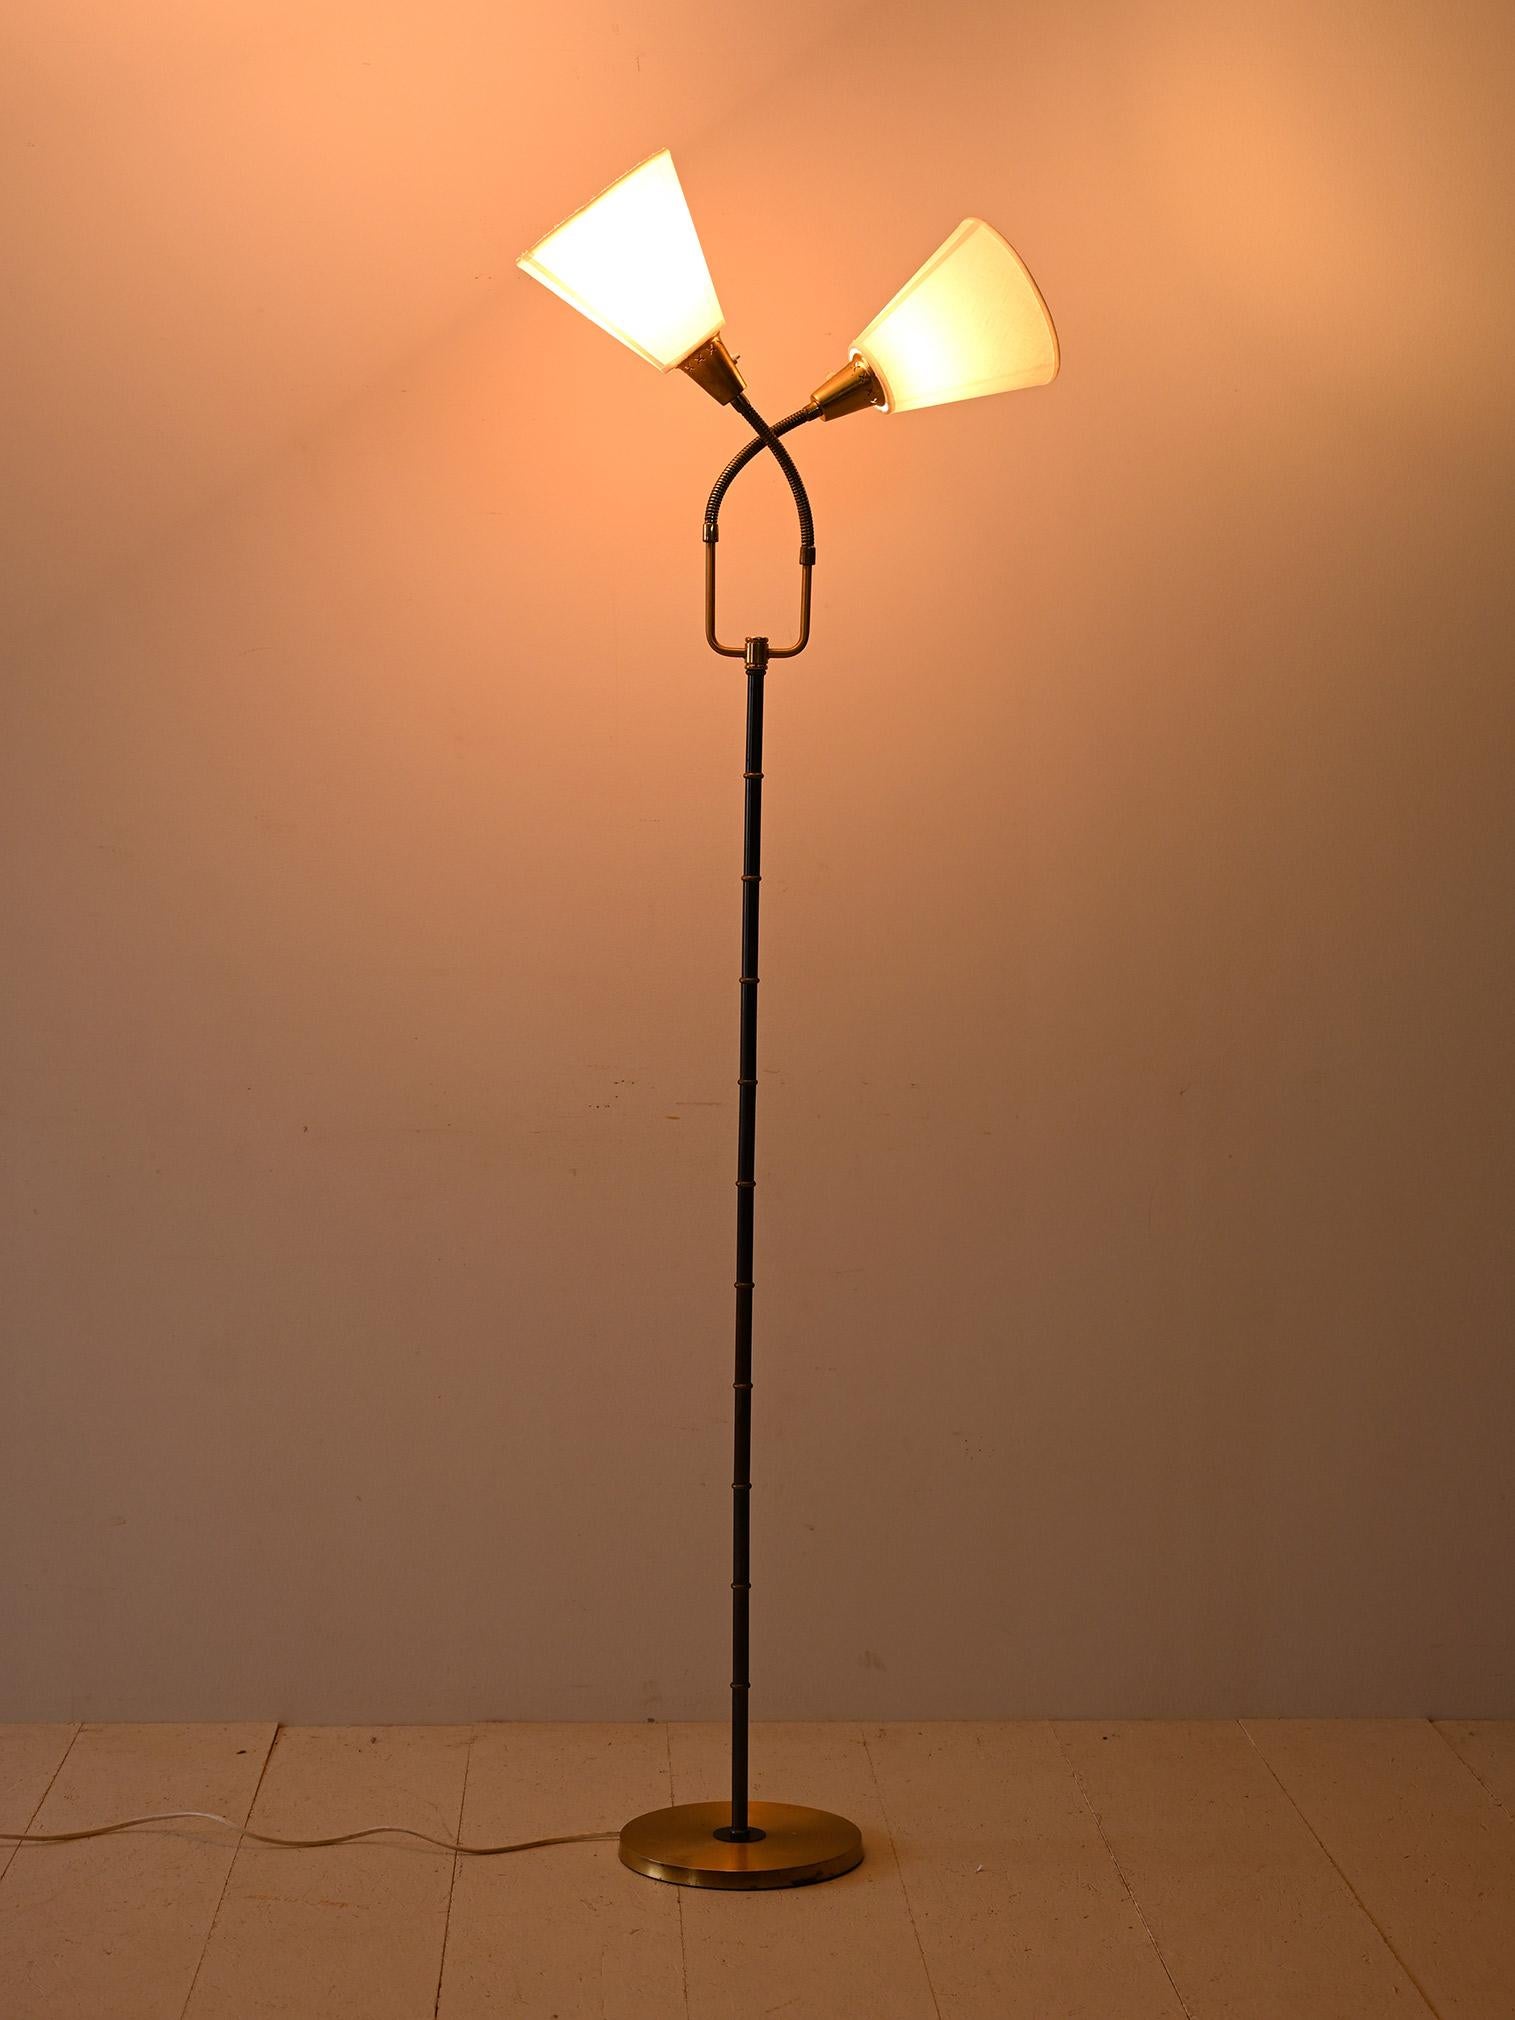 This vintage lamp features a minimalist design inspired by the Scandinavian style. The black metal frame adds a touch of sturdiness, while the part adjacent to the lampshade is flexible, allowing customized control over the orientation of the light.